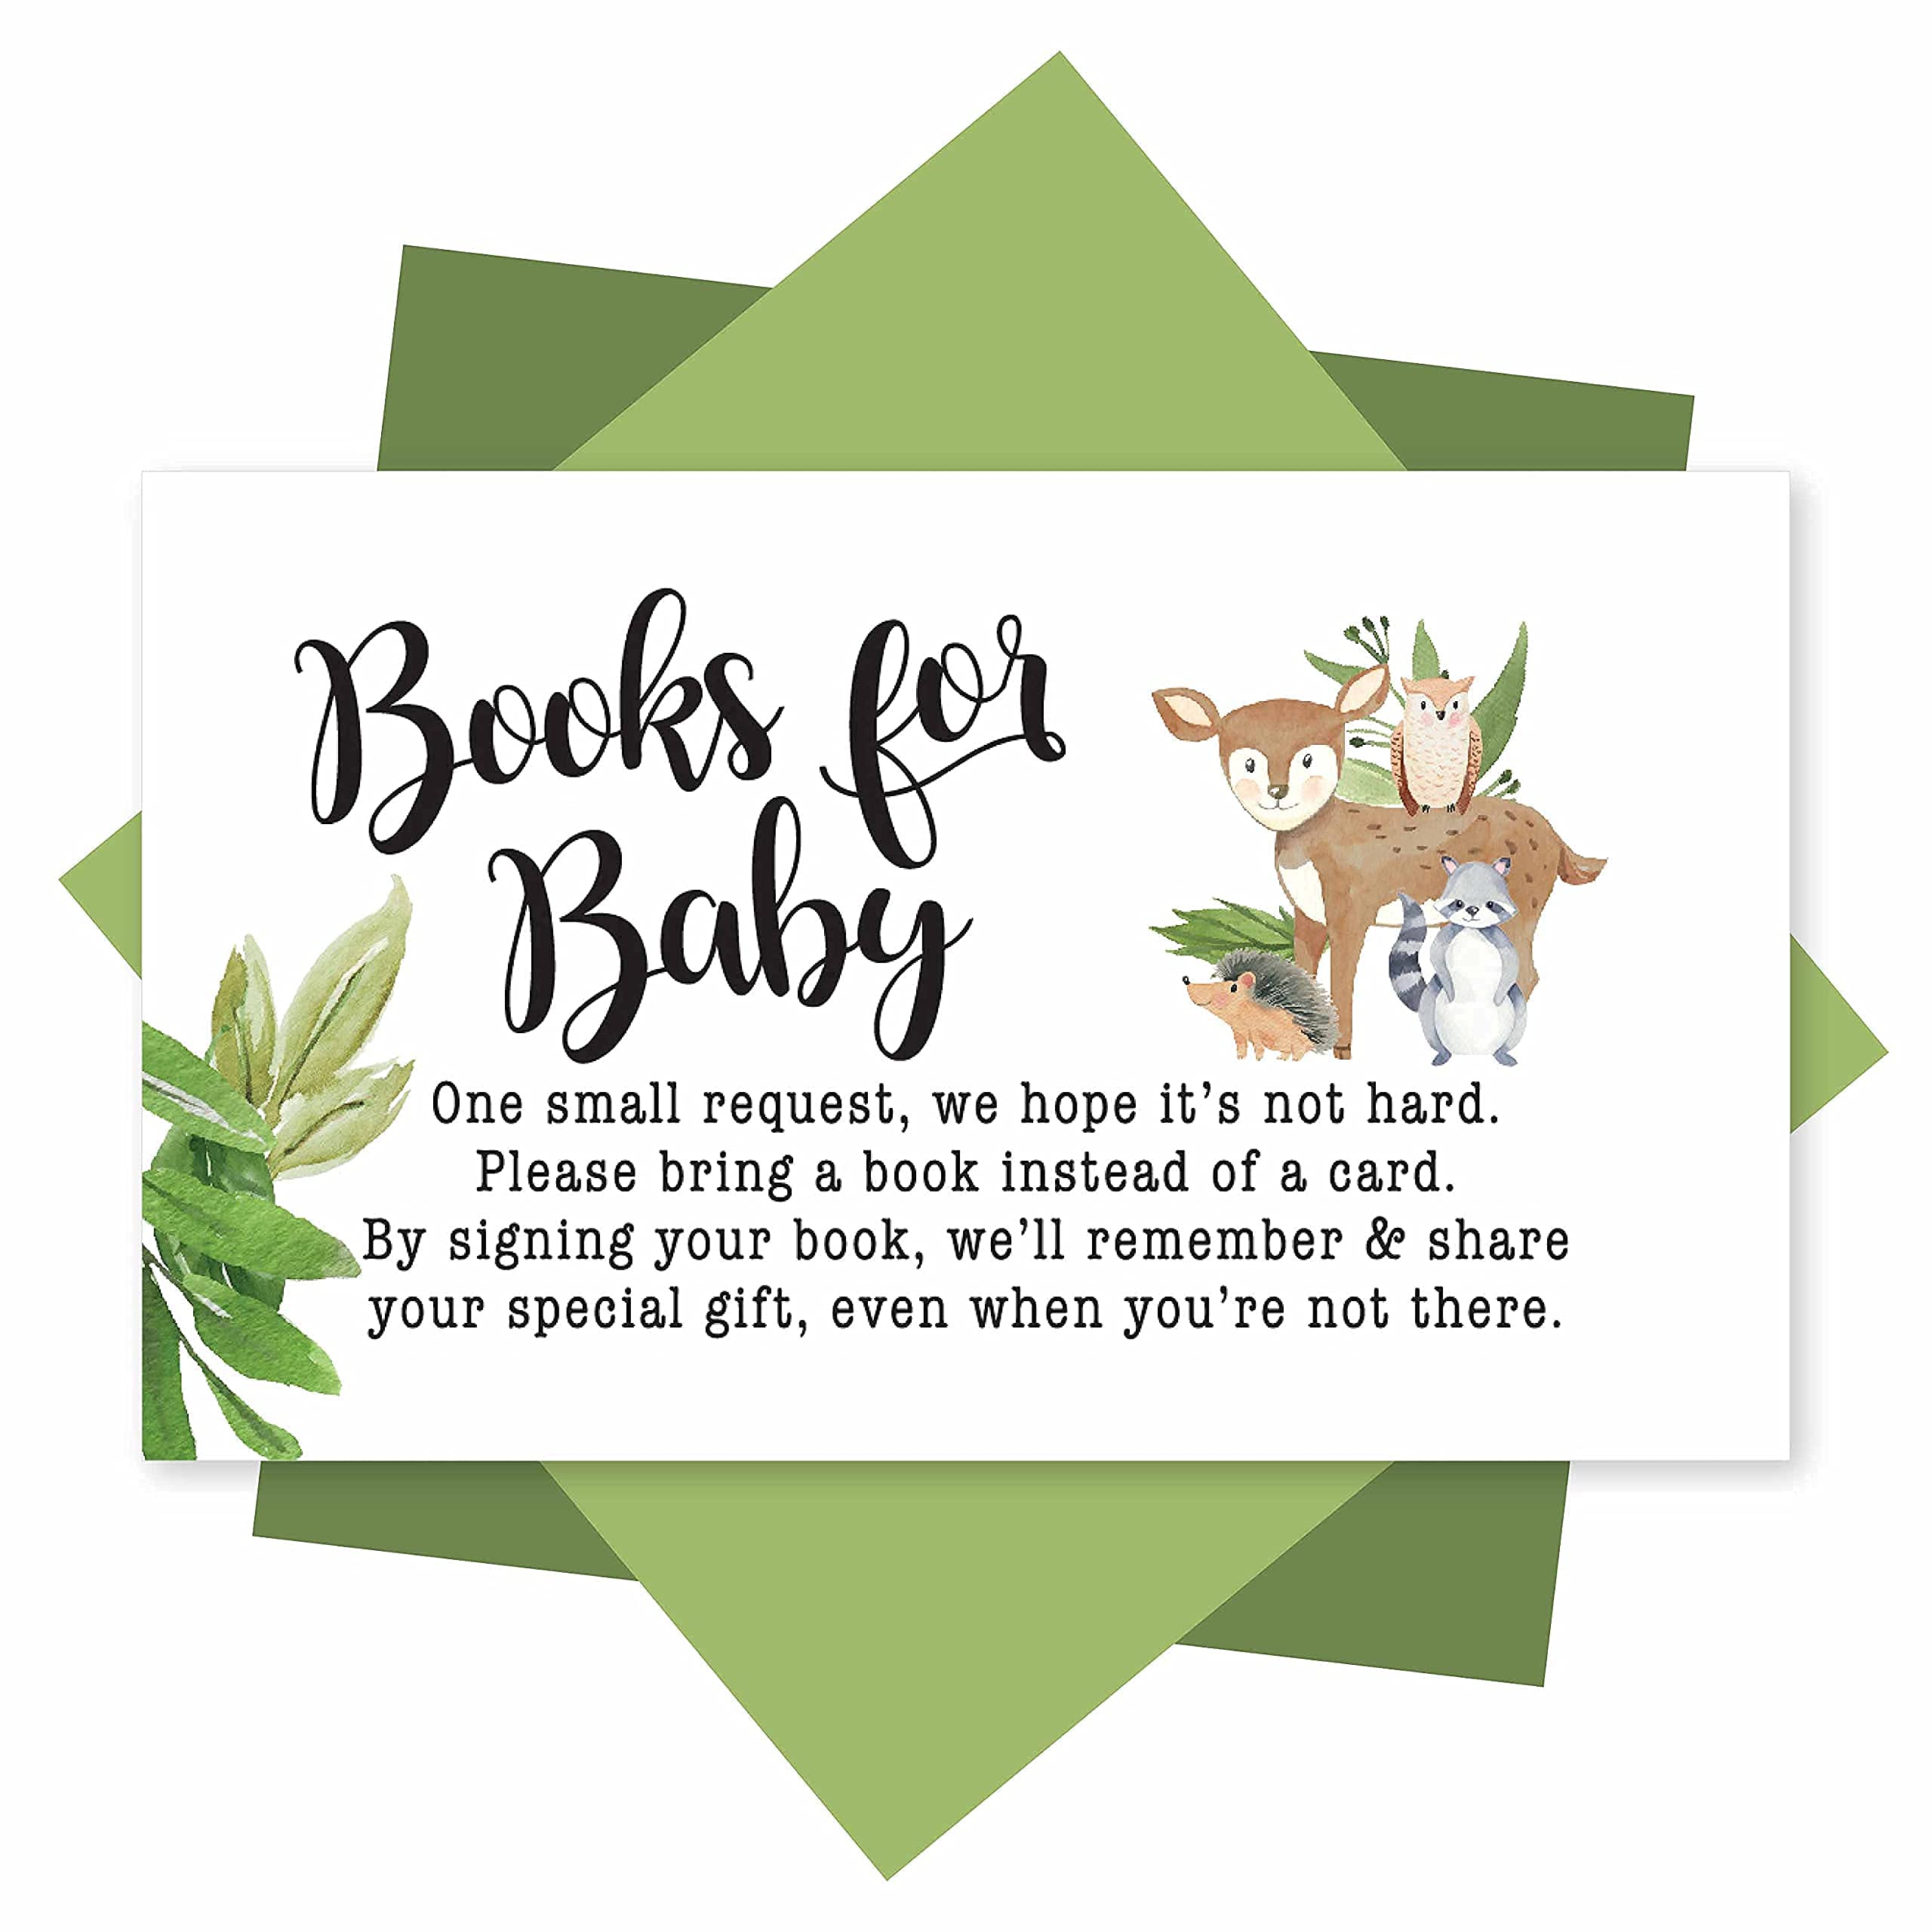 25 Greenery Woodland Baby Shower Invitations, 25 Book Request Baby Shower Guest Book Alternative, Sprinkle Invite for Boy or Girl, Bring A Book Instead Of A Card, Baby Shower Invitation Inserts